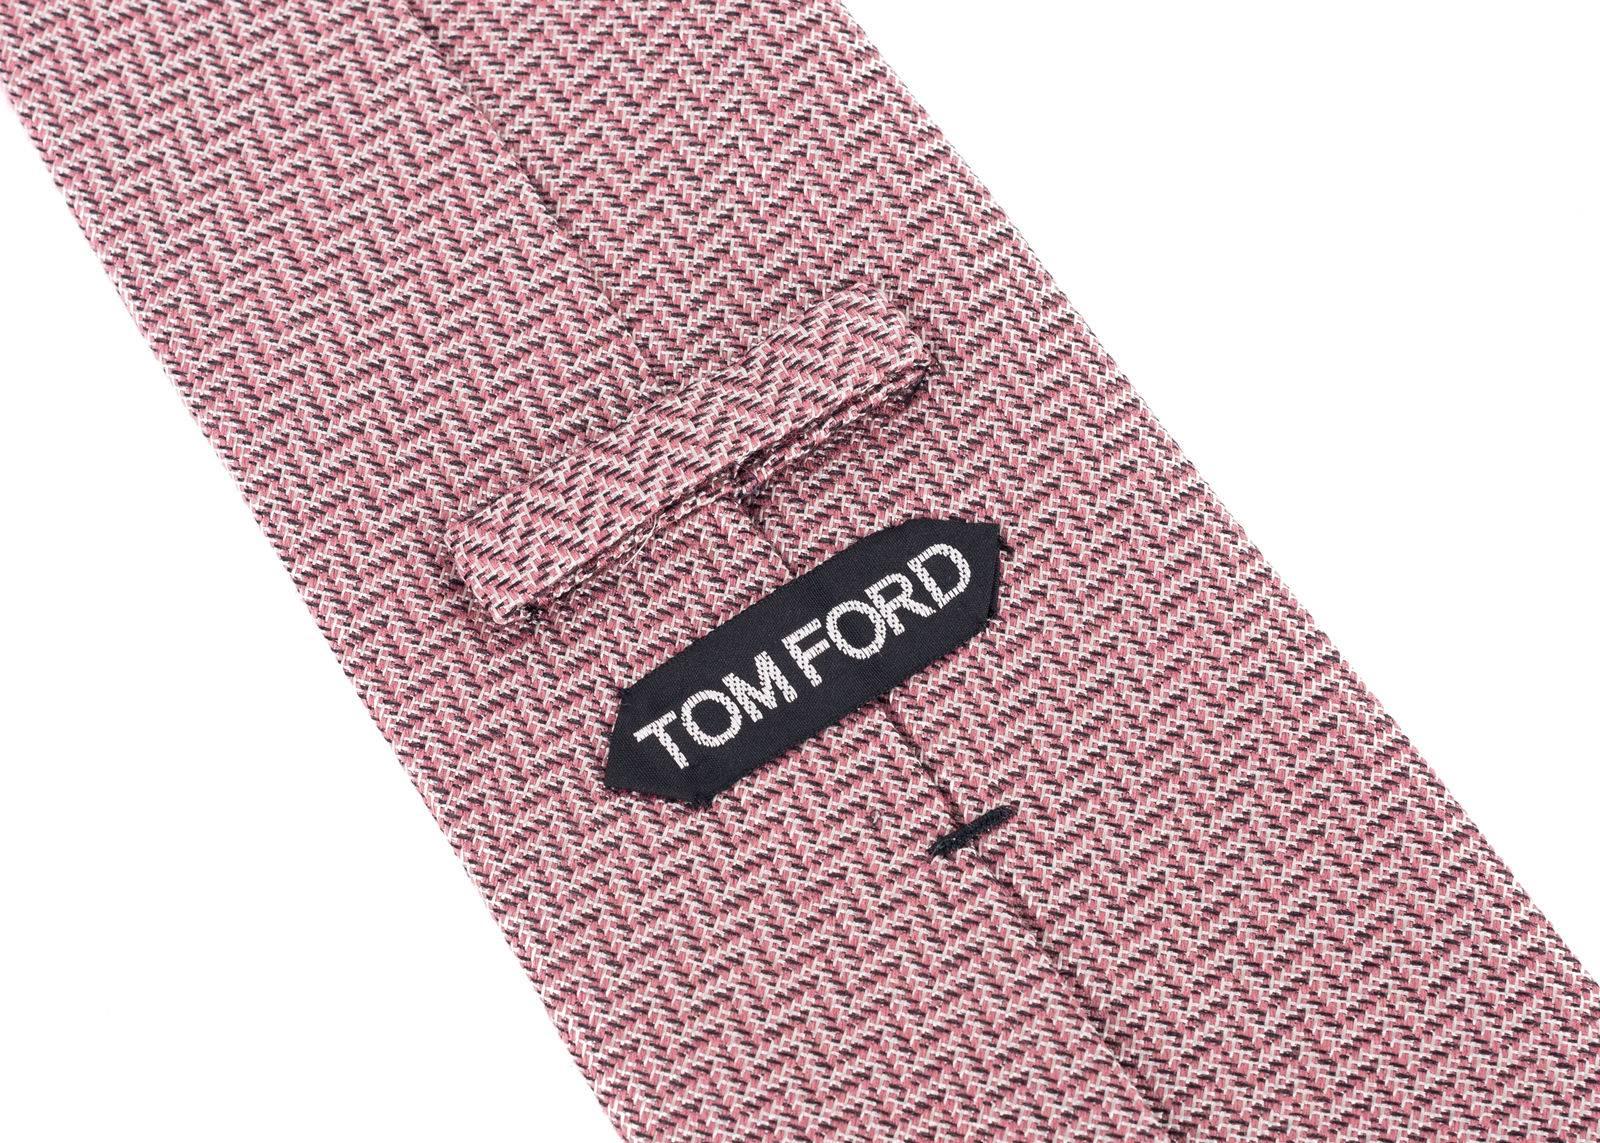 Blend Tie for important special occasions and professional events. The tie is great to pair with your favorite solid color button down and blazers with your chosen pair or classic trousers. Achieve that classy smart professional look overtime with